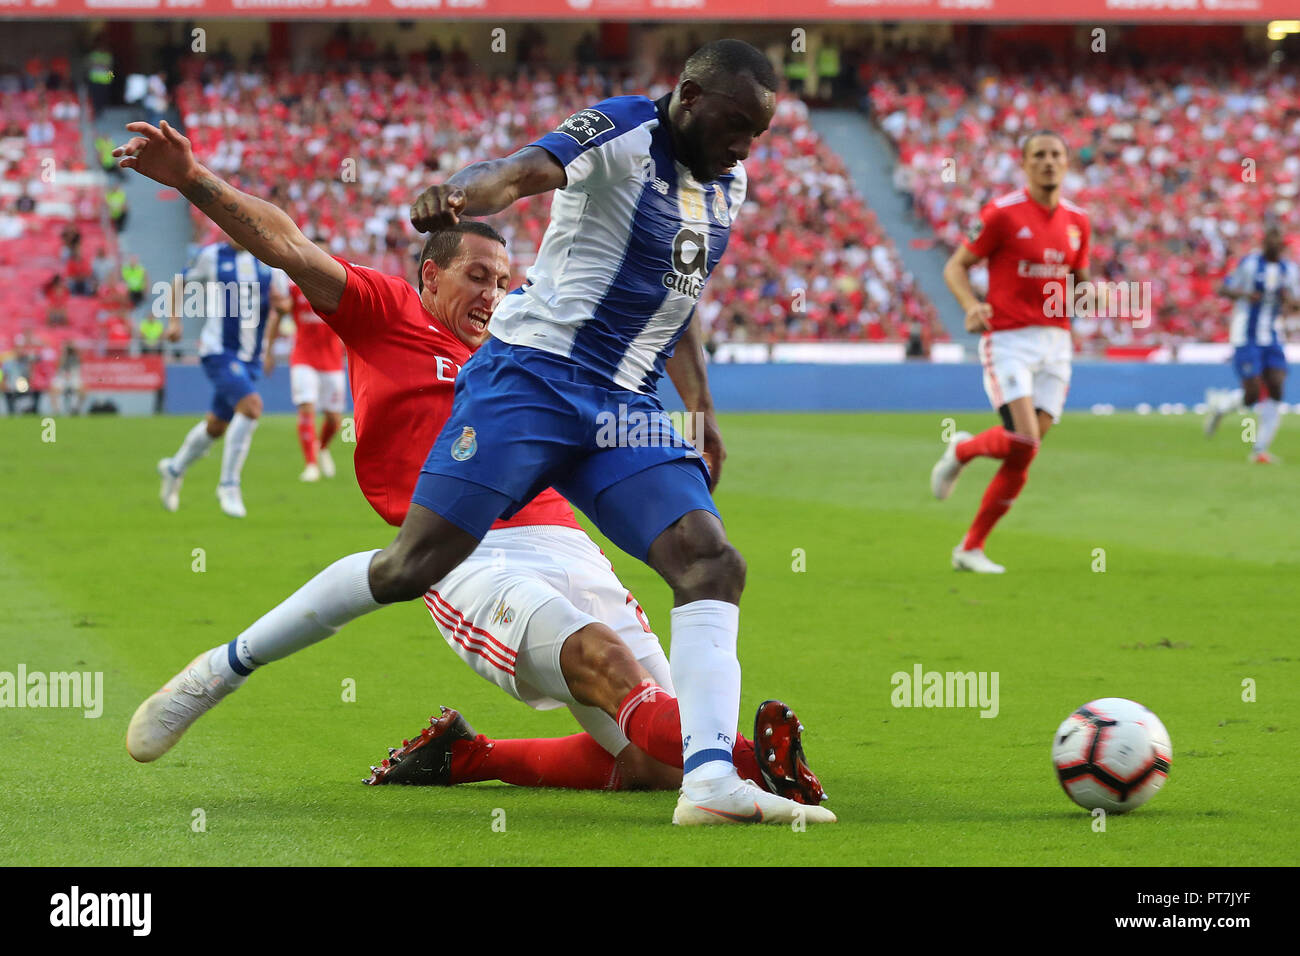 Lisbon, Portugal, Portugal. 7th Oct, 2018. CristiÃ¡n Lema of SL Benfica (L) with Moussa Marega of FC Porto (R) seen in action during League NOS 2018/19 football match between SL Benfica vs FC Porto. Credit: David Martins/SOPA Images/ZUMA Wire/Alamy Live News Stock Photo